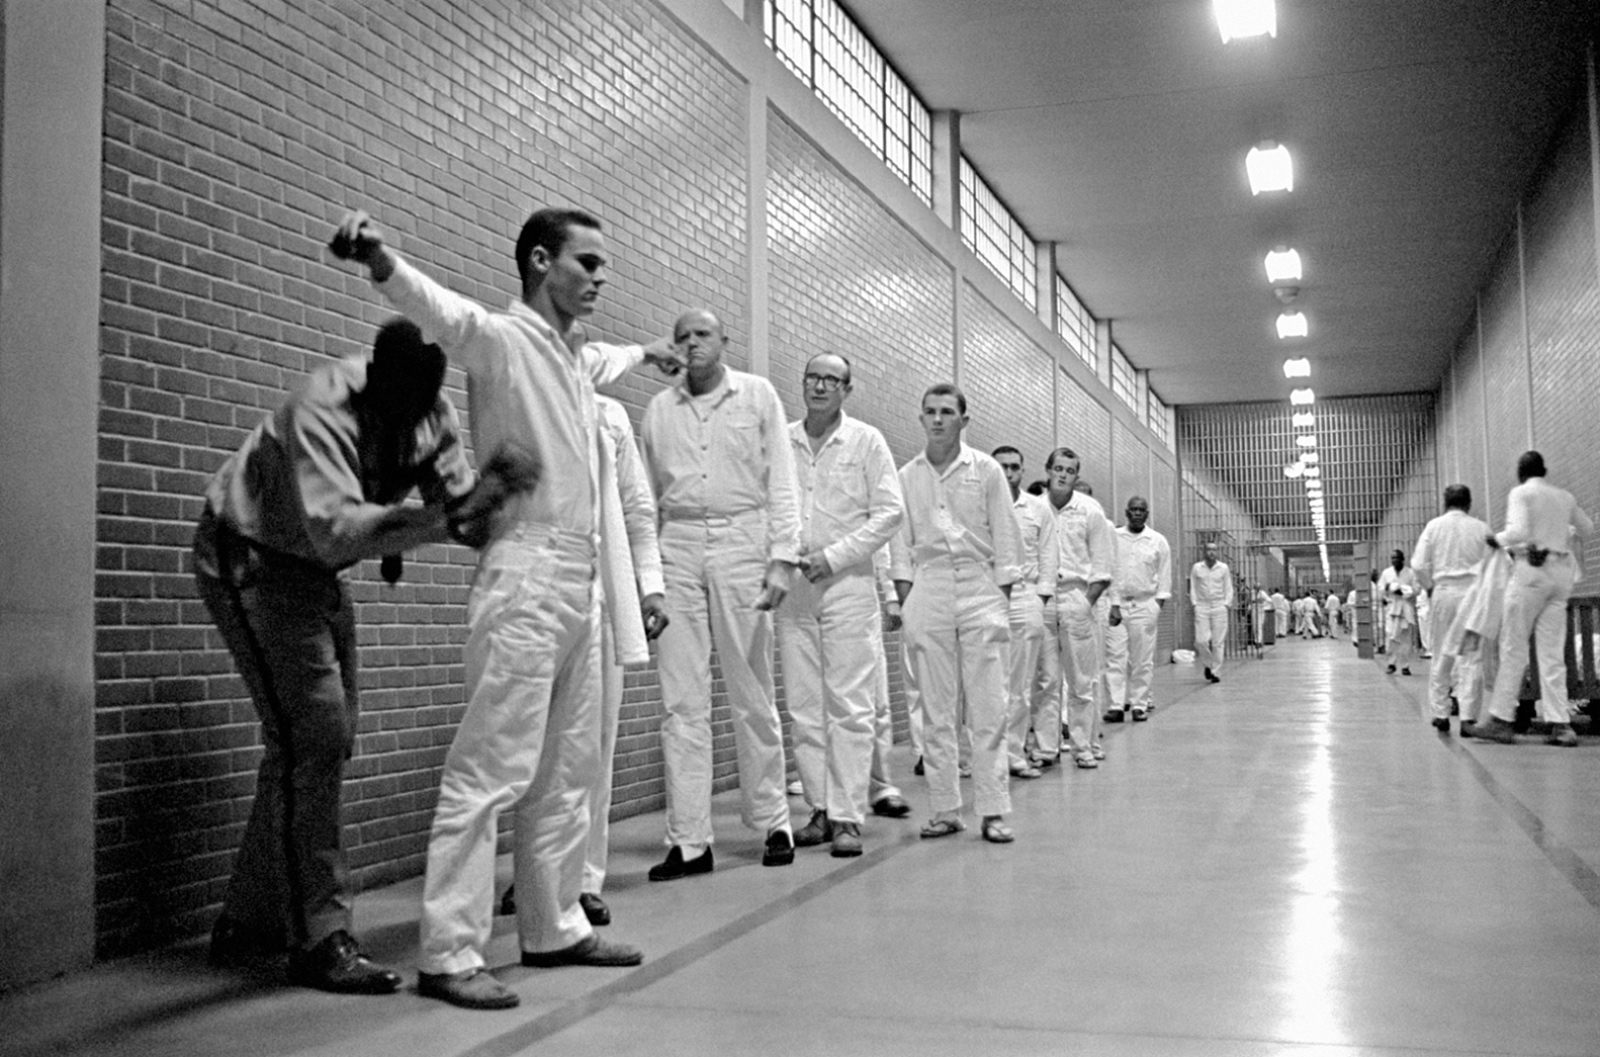 A shakedown of inmates in the main corridor of the Ellis Prison Farm, Huntsville, Texas, 1968; photograph by Danny Lyon from his 1971 book Conversations with the Dead, which has just been reissued by Phaidon. A retrospective of his work, ‘Danny Lyon: Message to the Future,’ will be on view at the Whitney Museum of American Art, New York City, June 17–September 25, 2016.